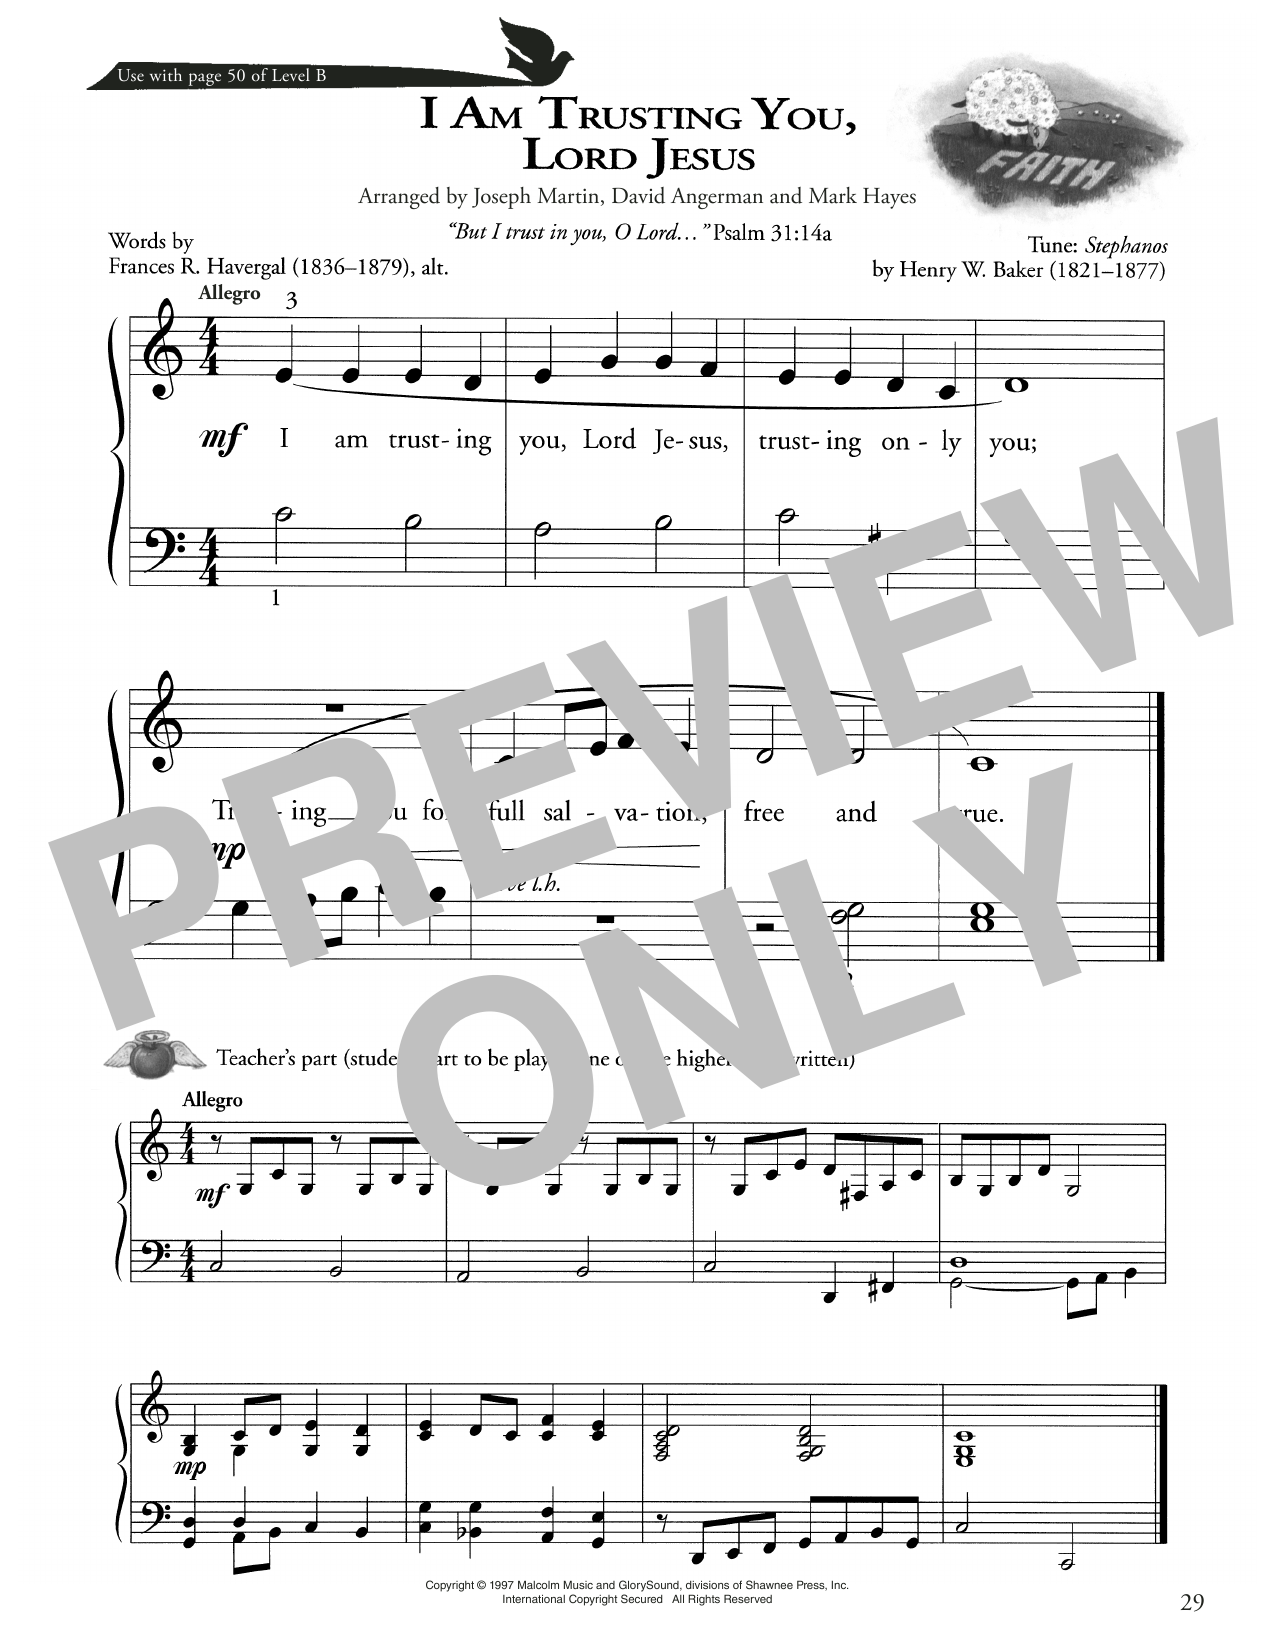 Download Henry W. Baker I Am Trusting You, Lord Jesus Sheet Music